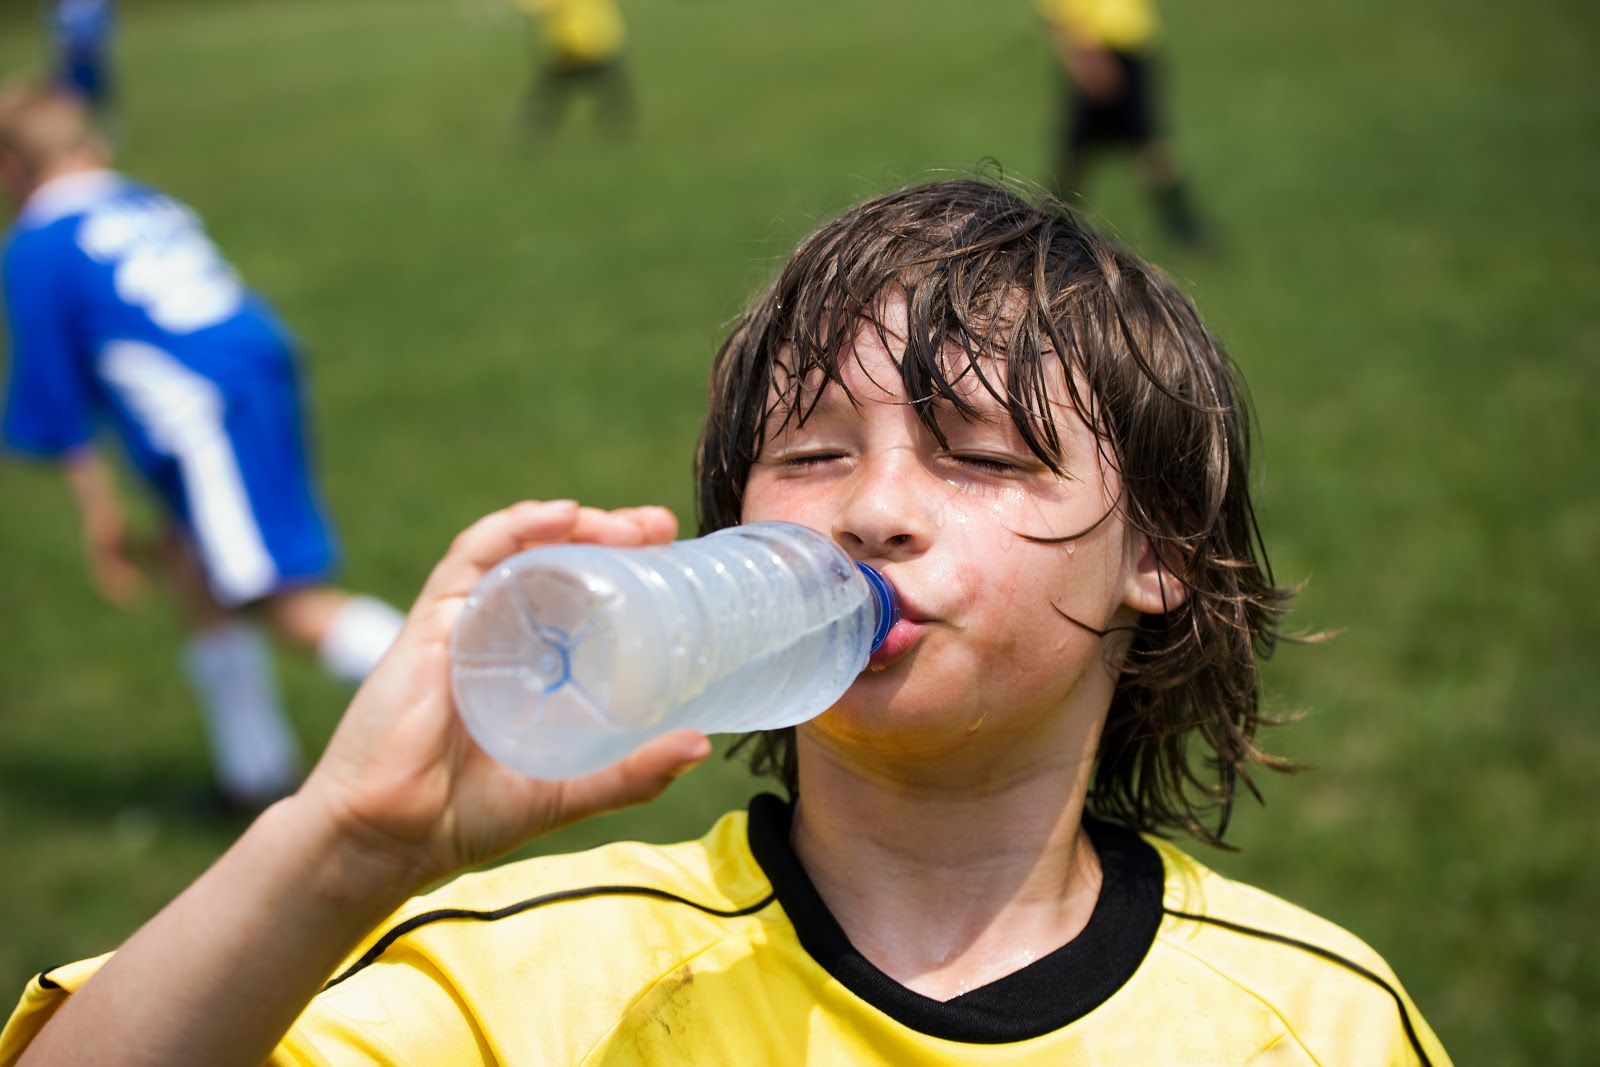 boy drinking water during a game